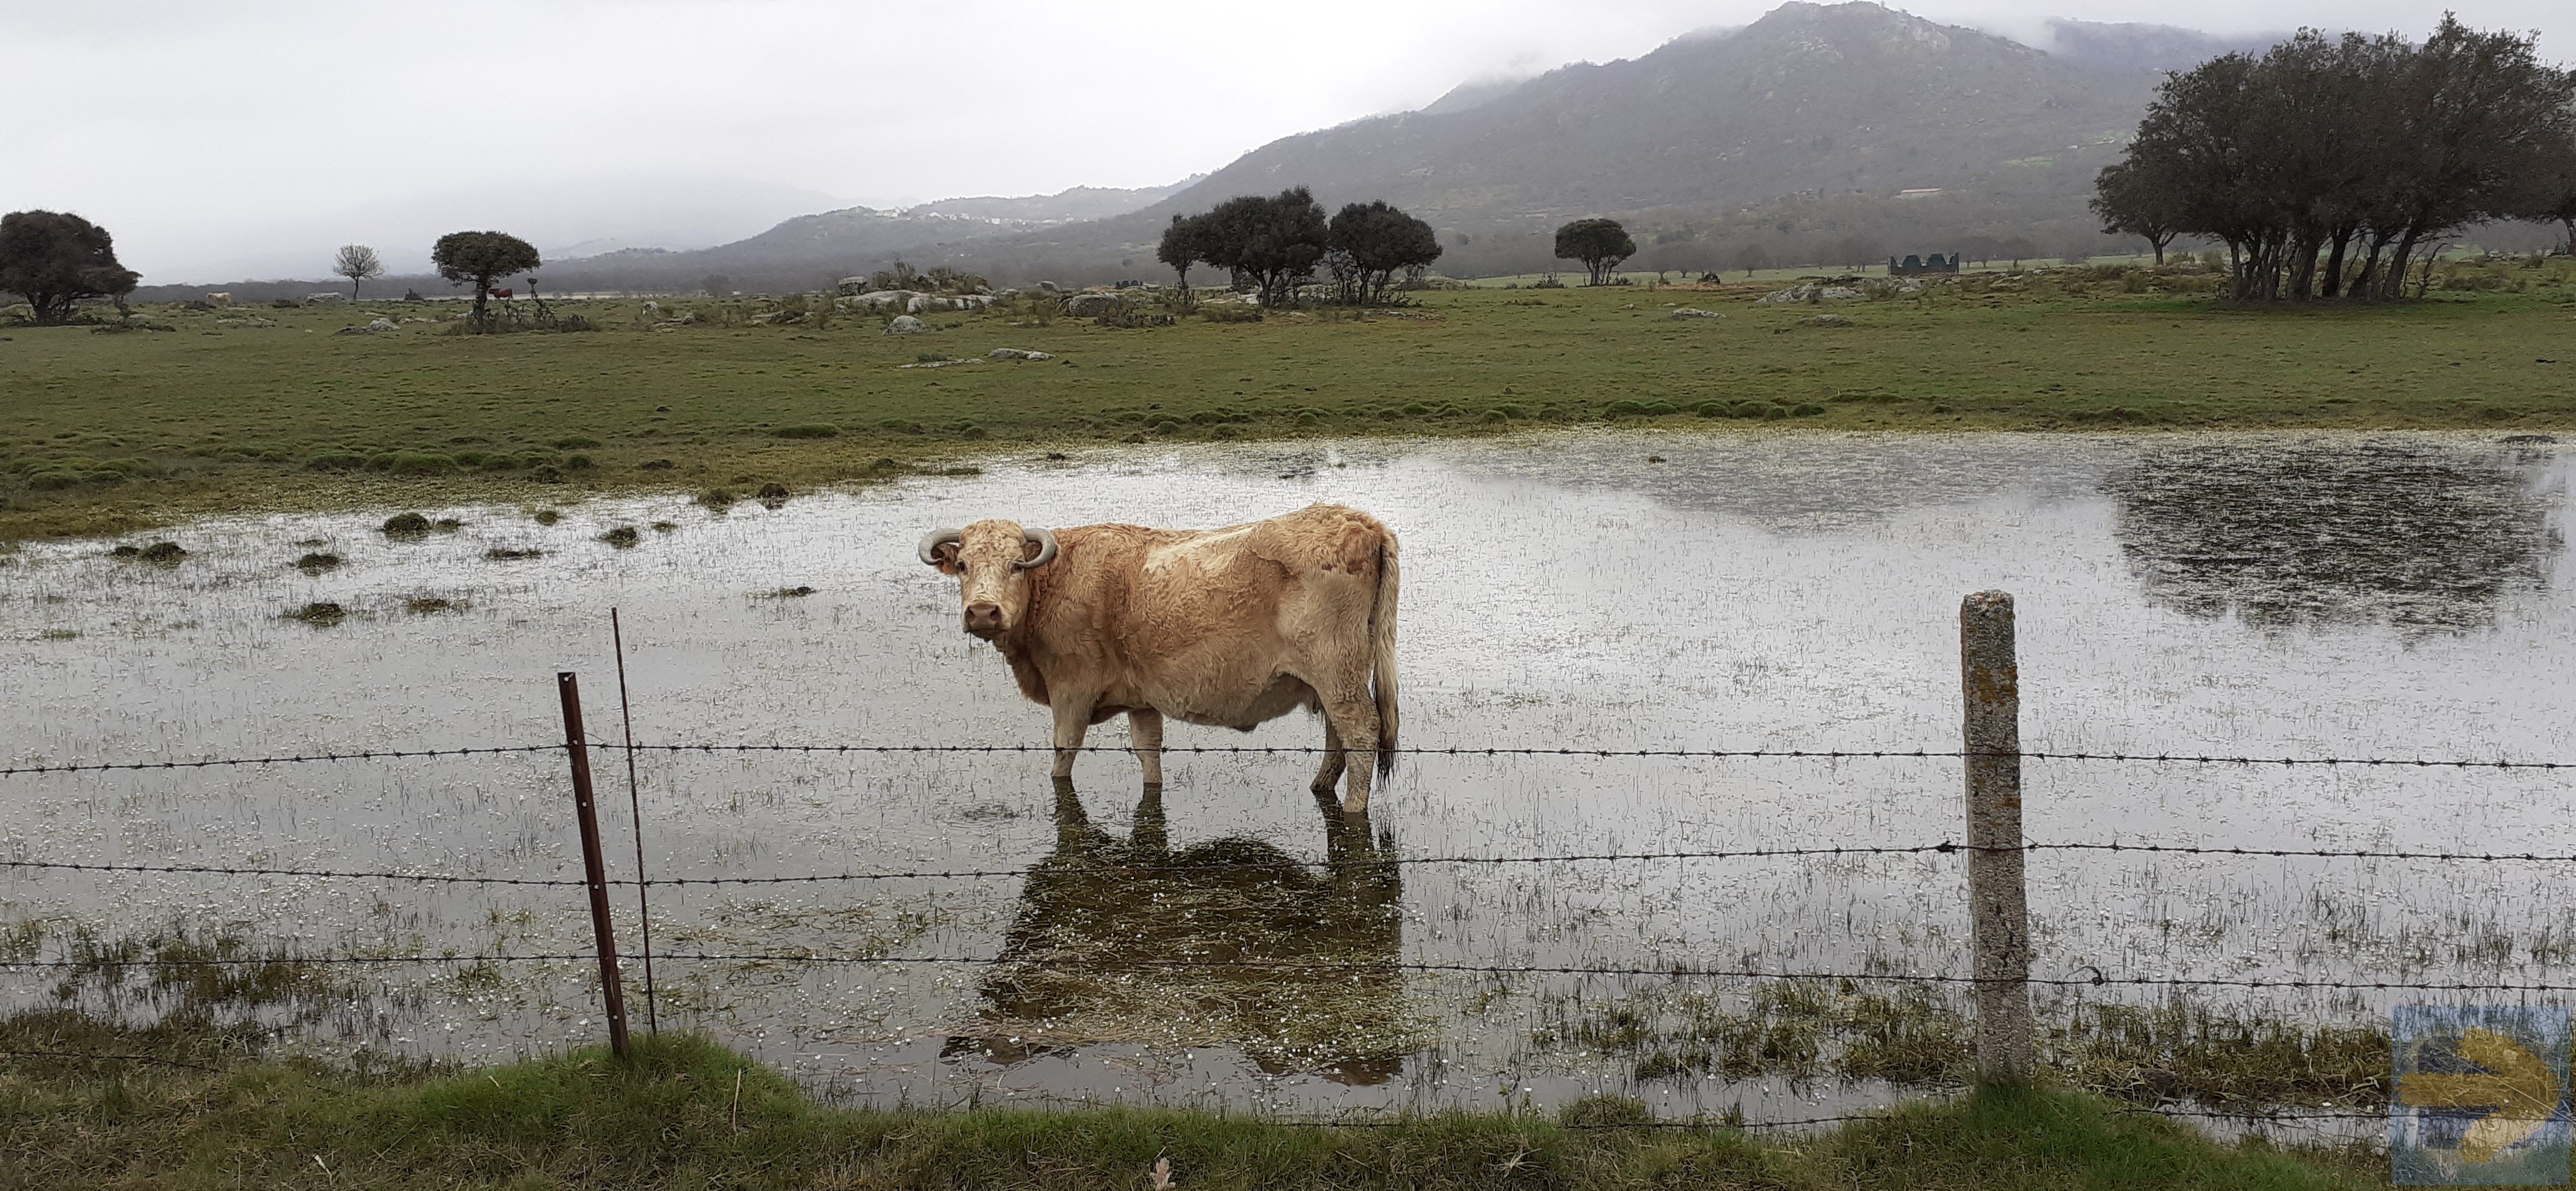 Wading Cow spoted on the way to Fuenterroble. 03 March 2020